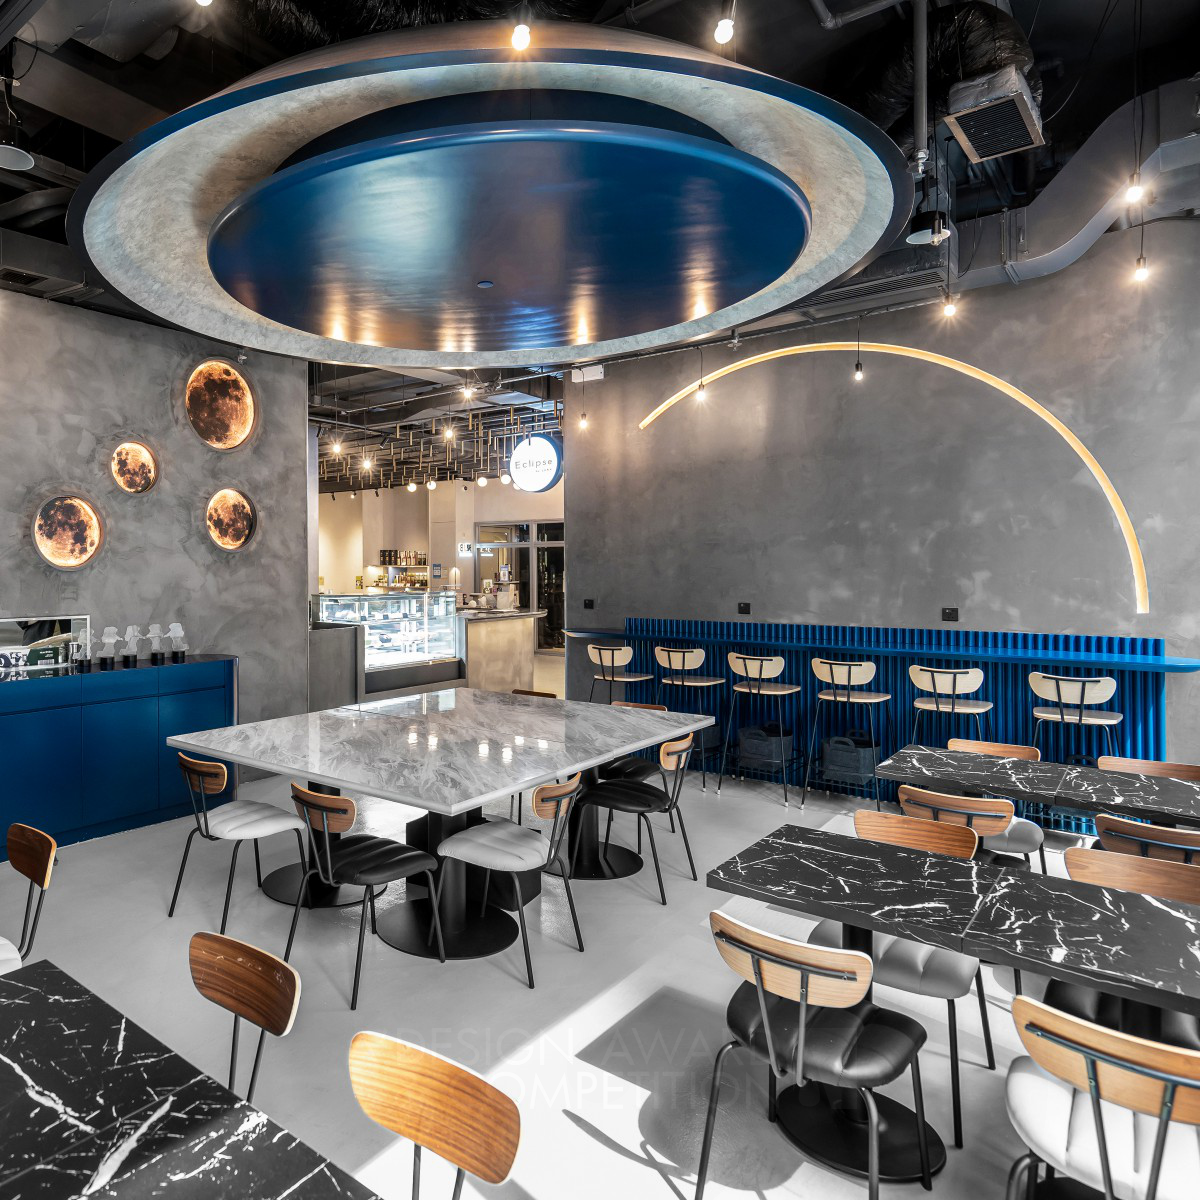 Hing Cheng wins Silver at the prestigious A' Interior Space, Retail and Exhibition Design Award with Yachi Kura Restaurant.